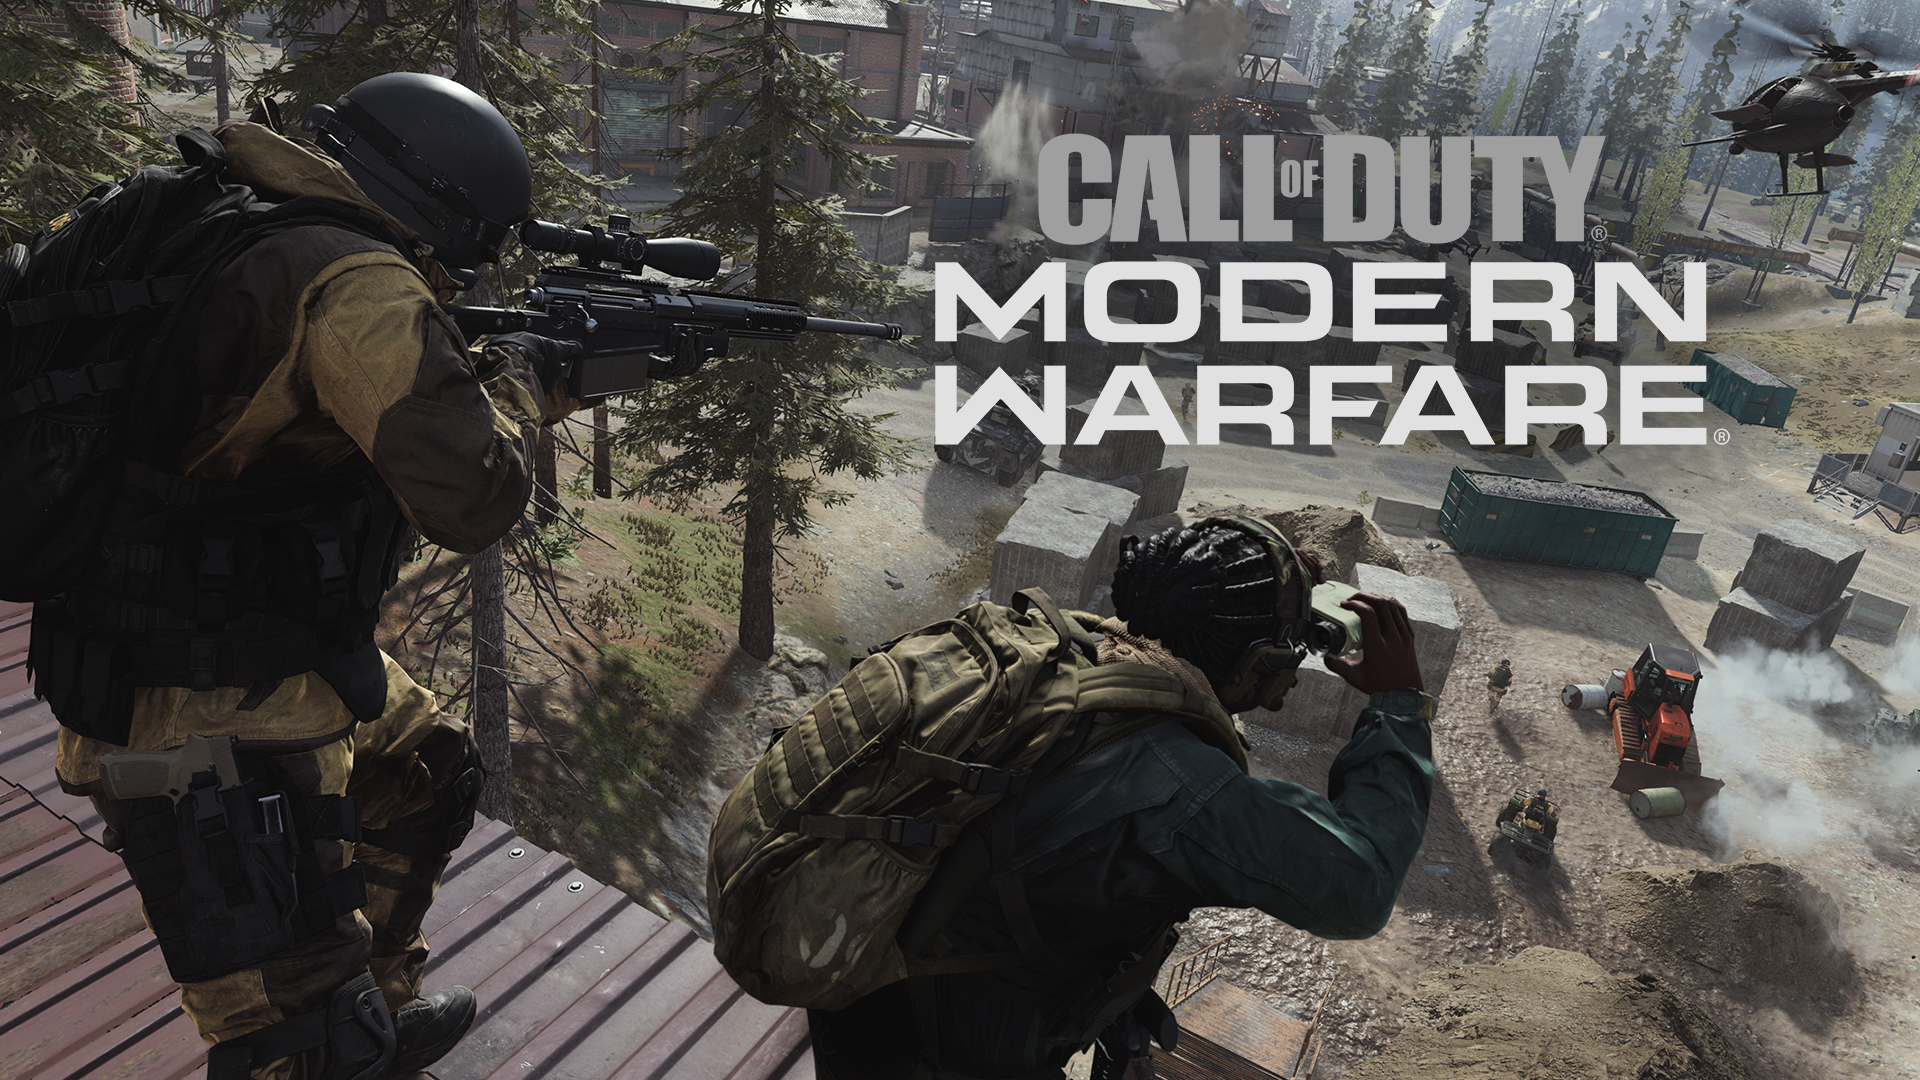 Video For Everything You Need to Know About the Call of Duty: Modern Warfare Beta Test on Xbox One